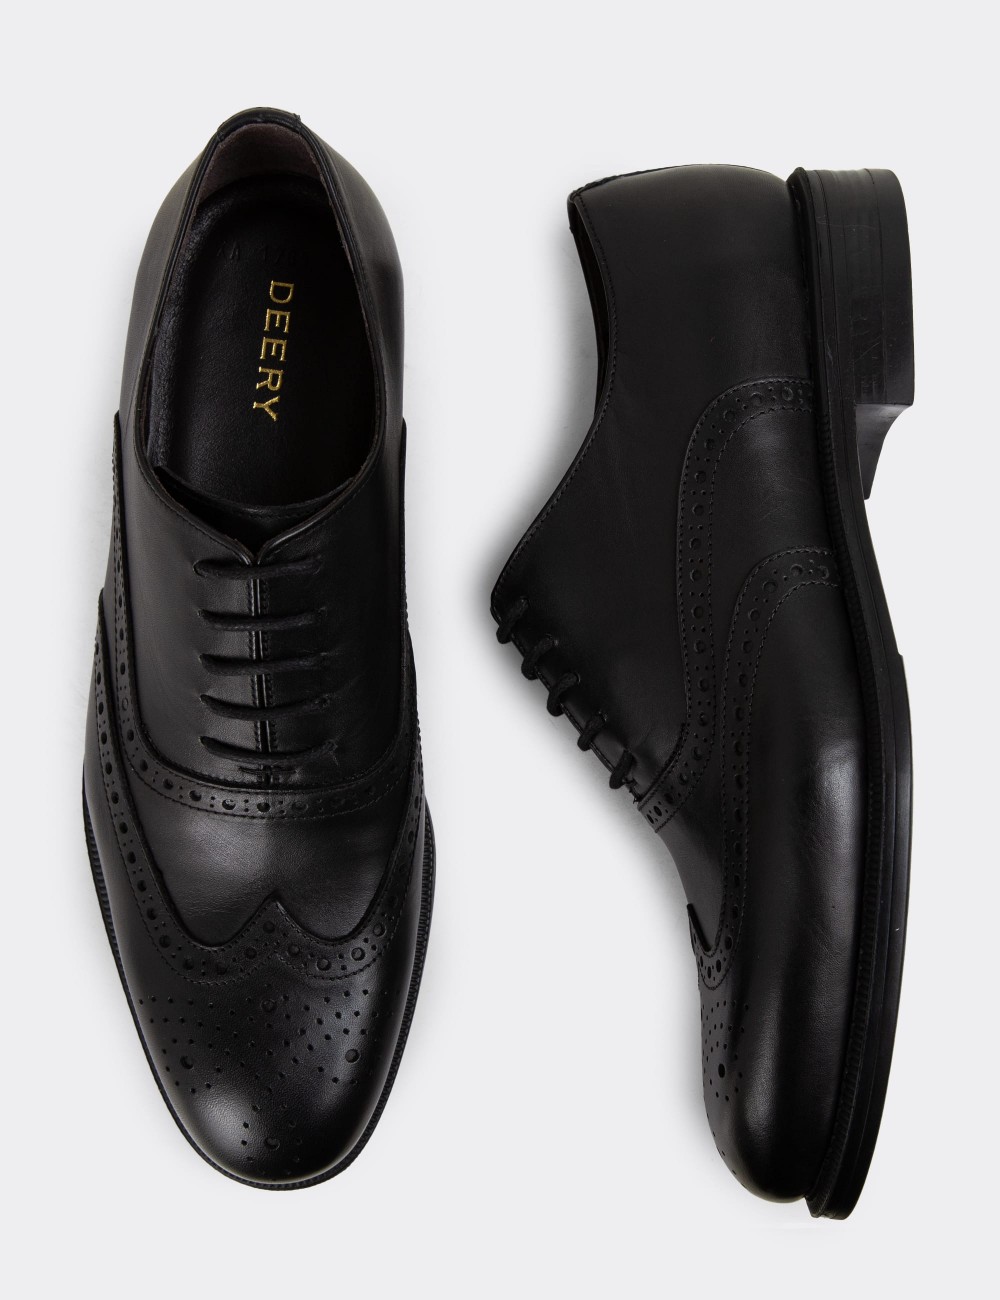 Black Leather Classic Shoes - 01785MSYHC01